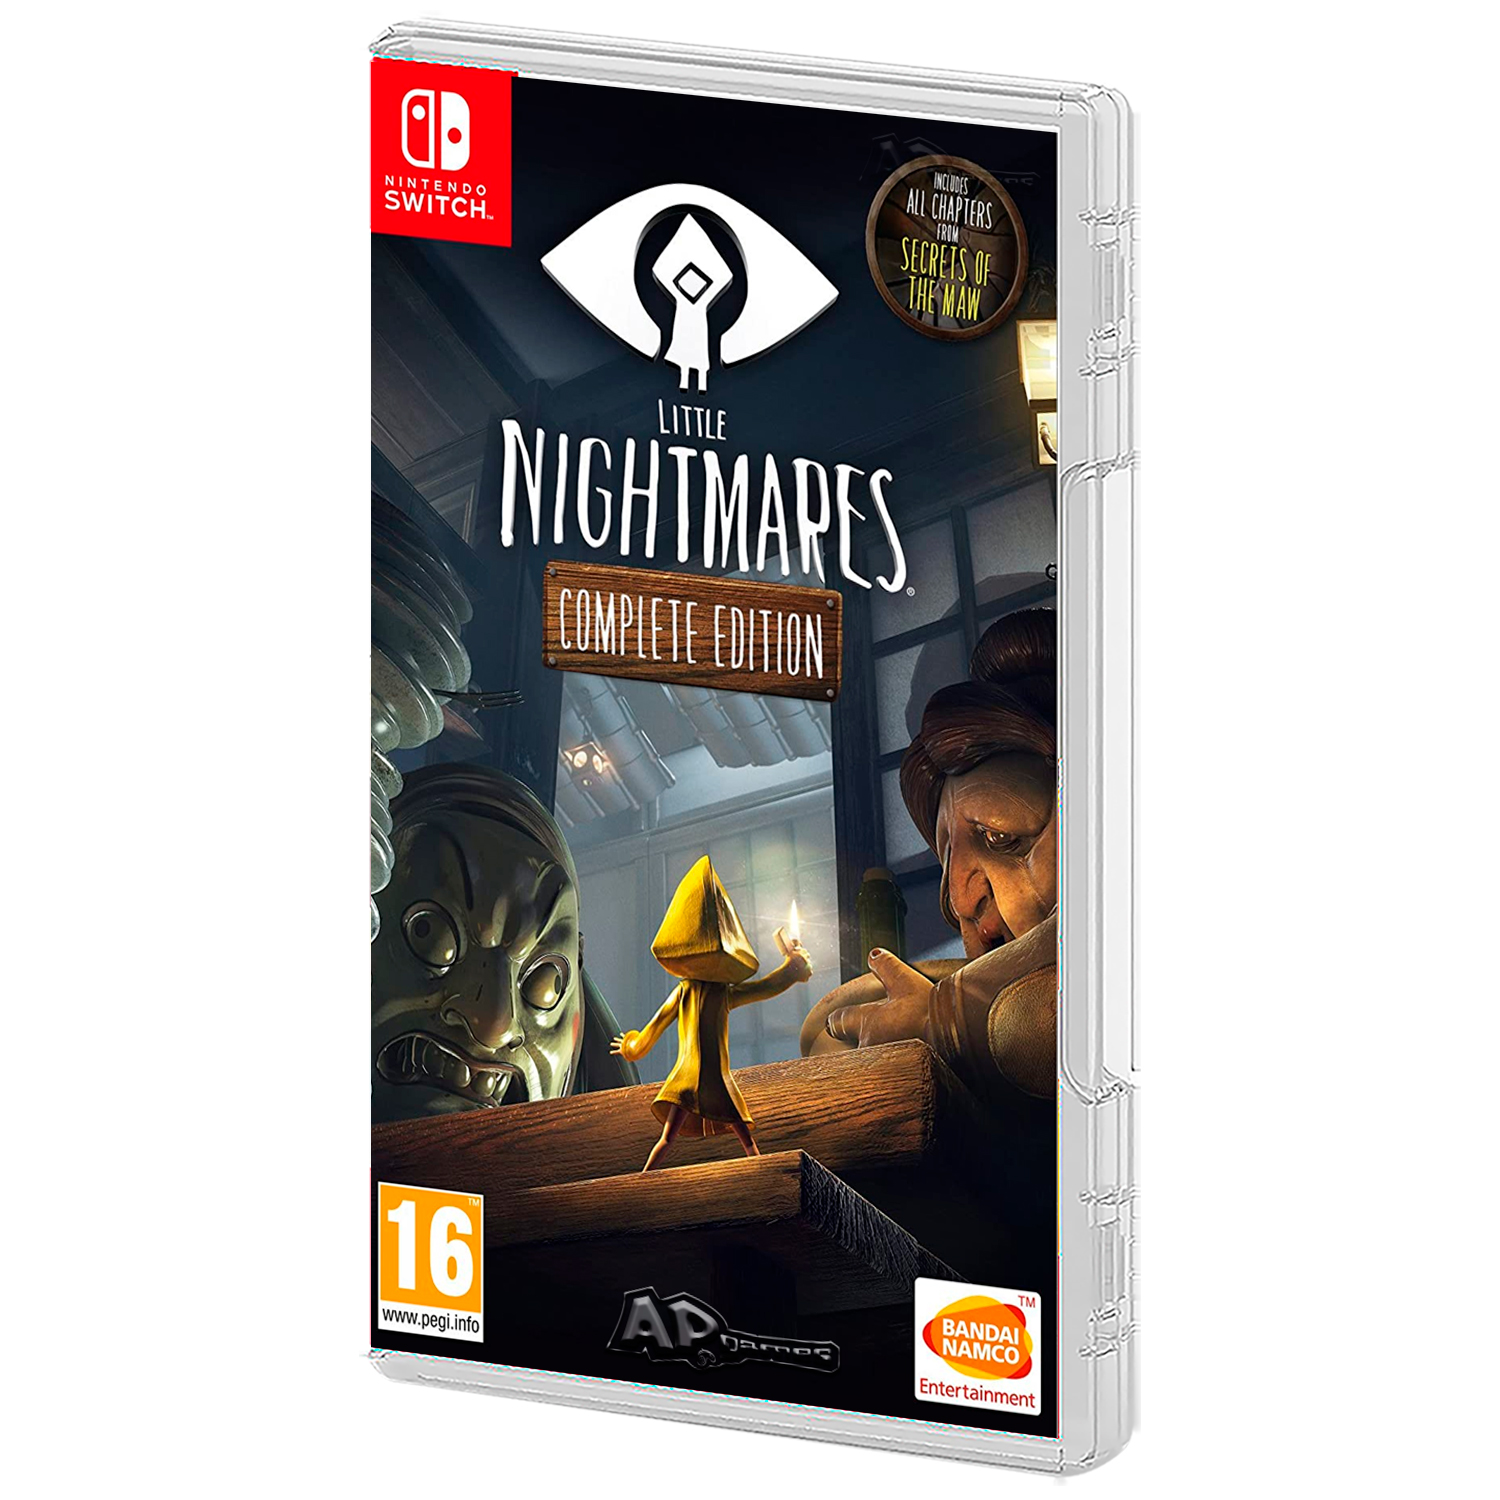 LITTLE NIGHTMARES COMPLETE EDITION NSW